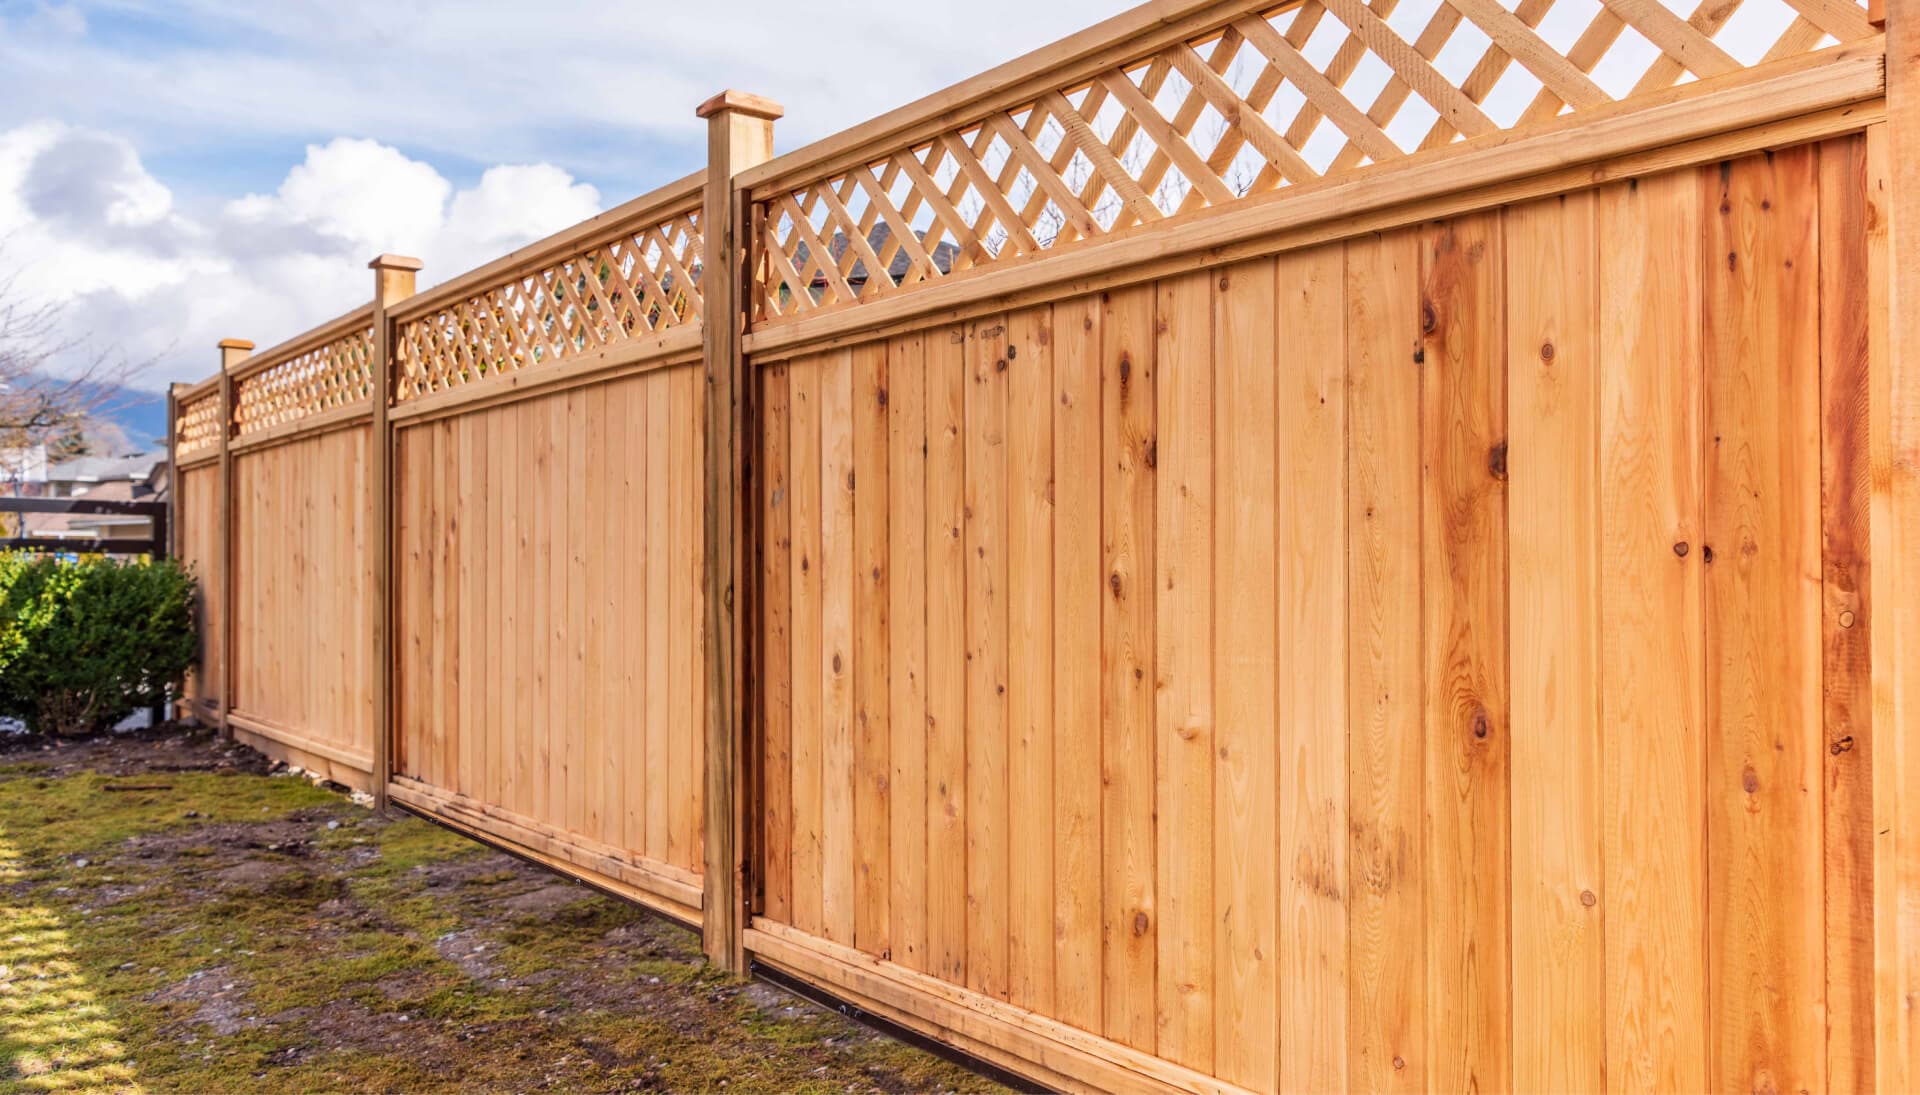 A custom wood fence installation is completed on a property in Wausau, WI.